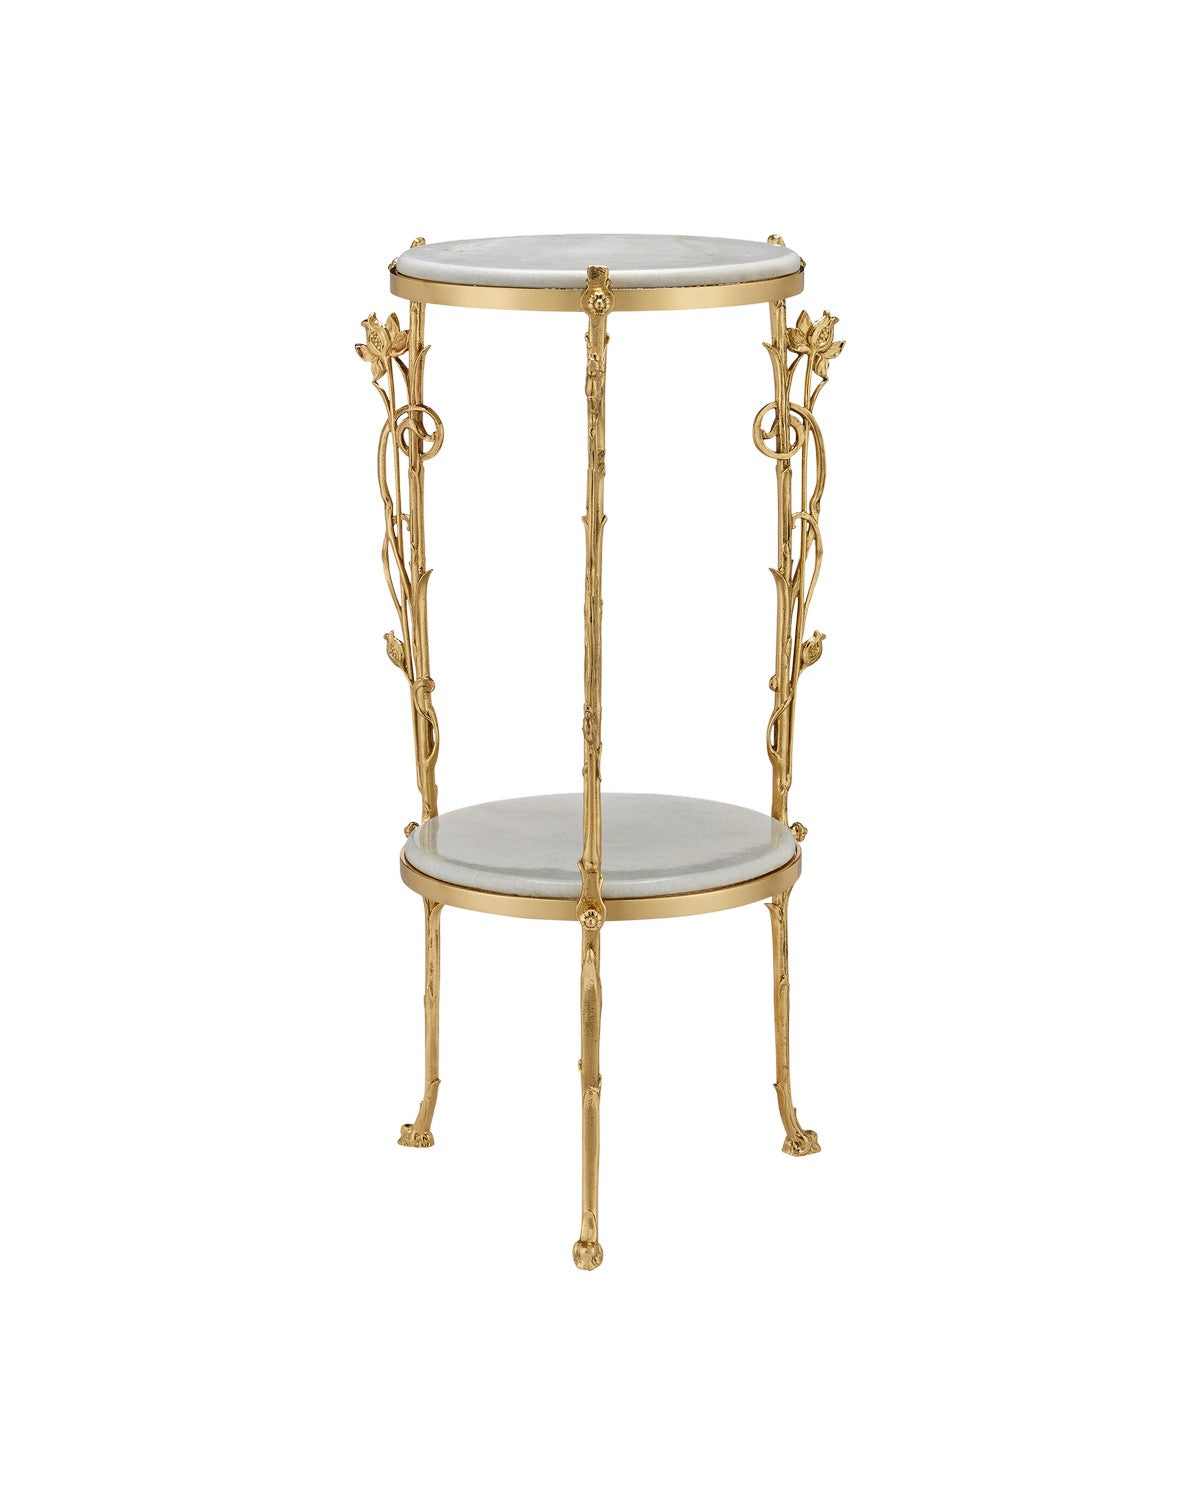 Currey and Company - 4000-0178 - Accent Table - Fiore - Polished Brass/Natural